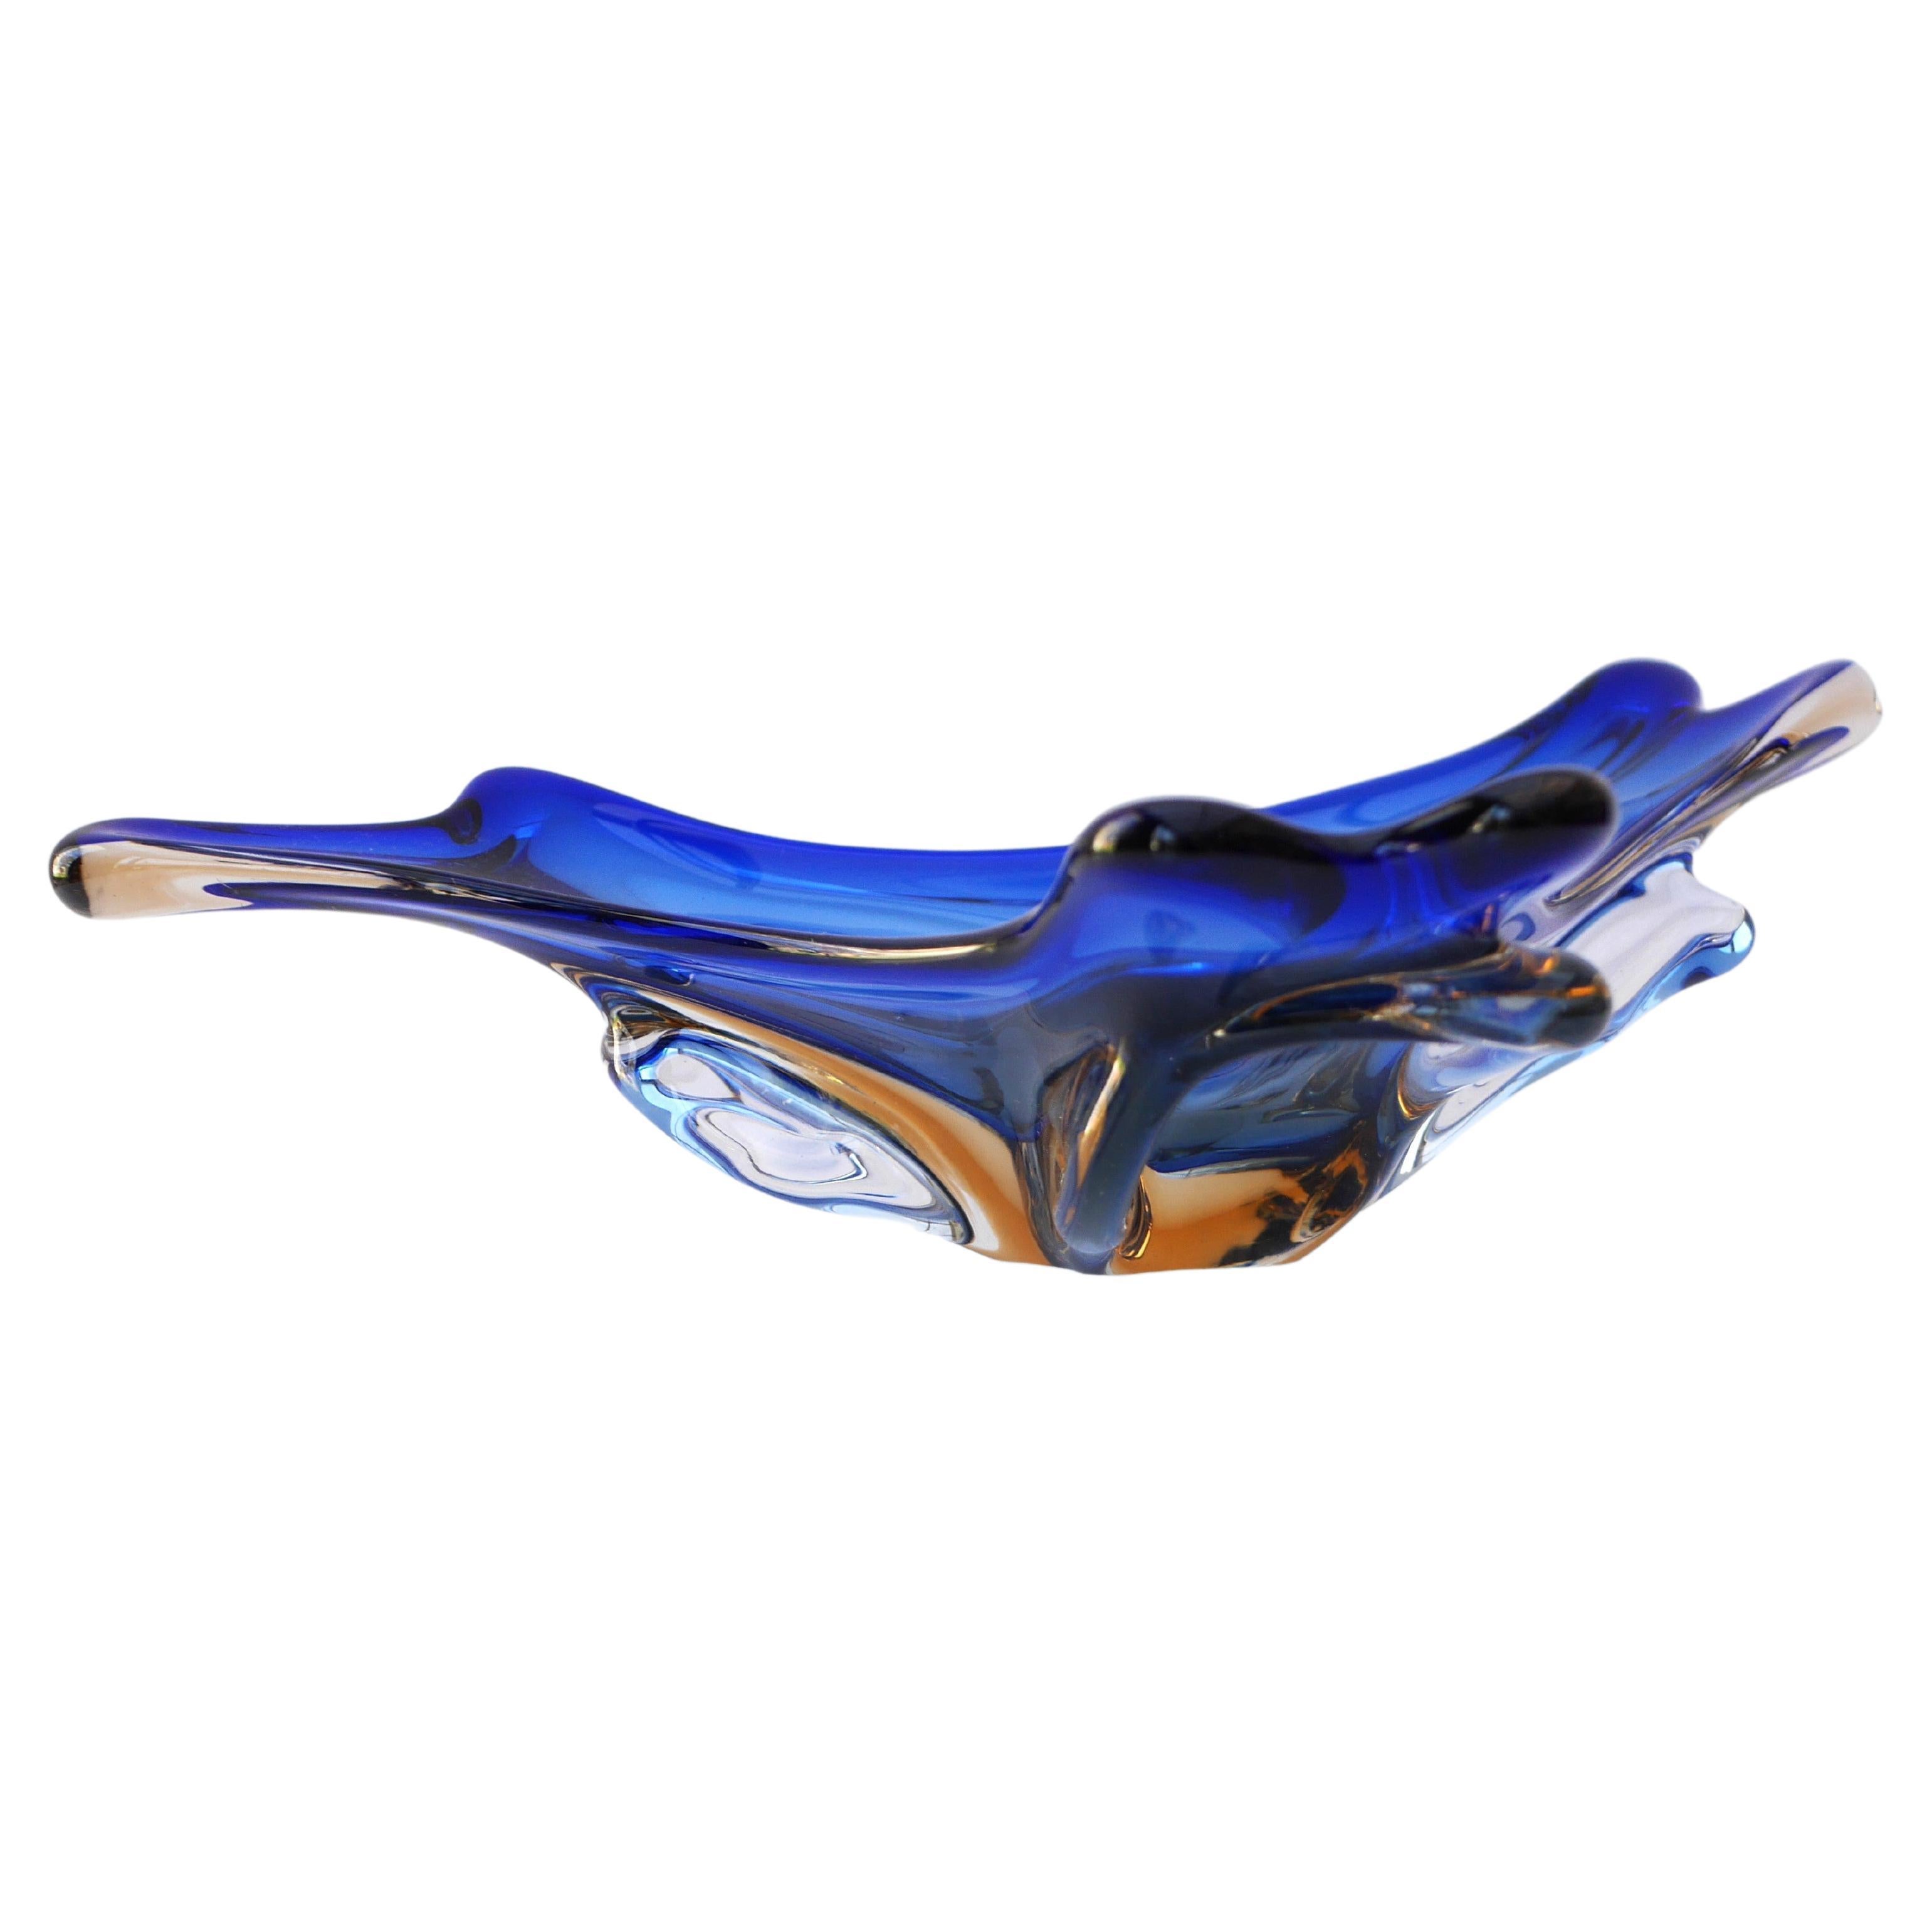 Mid-century modern Murano glass bowl in cobolt blue from 1960s.